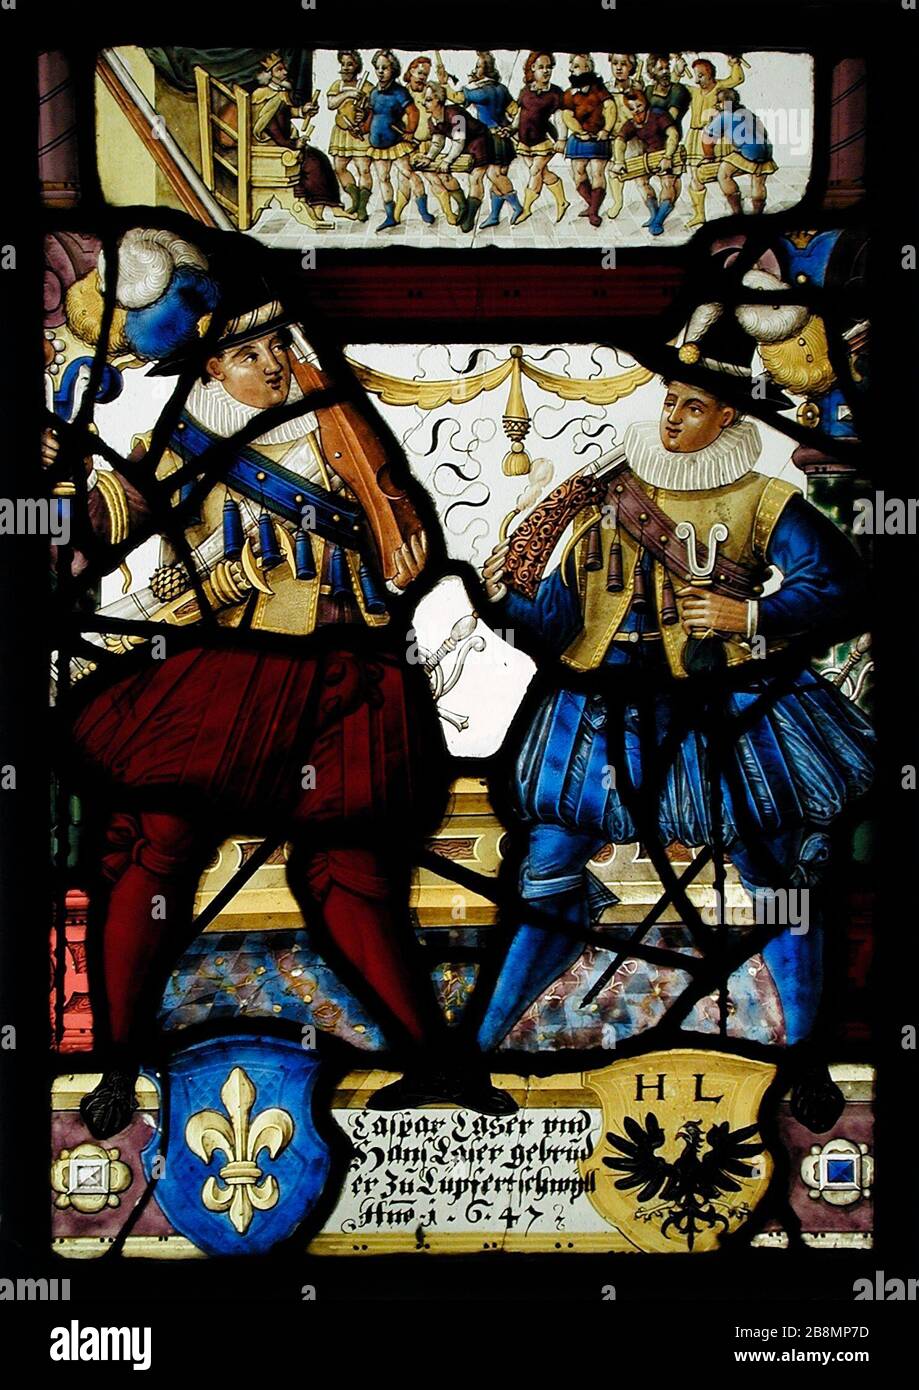 Heraldic Panel: Arms of the Brothers Caspar and Hans Laser; English:  Switzerland, 1647 Architecture; Architectural Elements Pot metal; white  glass with silver stain and enamel 13 1/8 x 9 3/8 in. (33.34